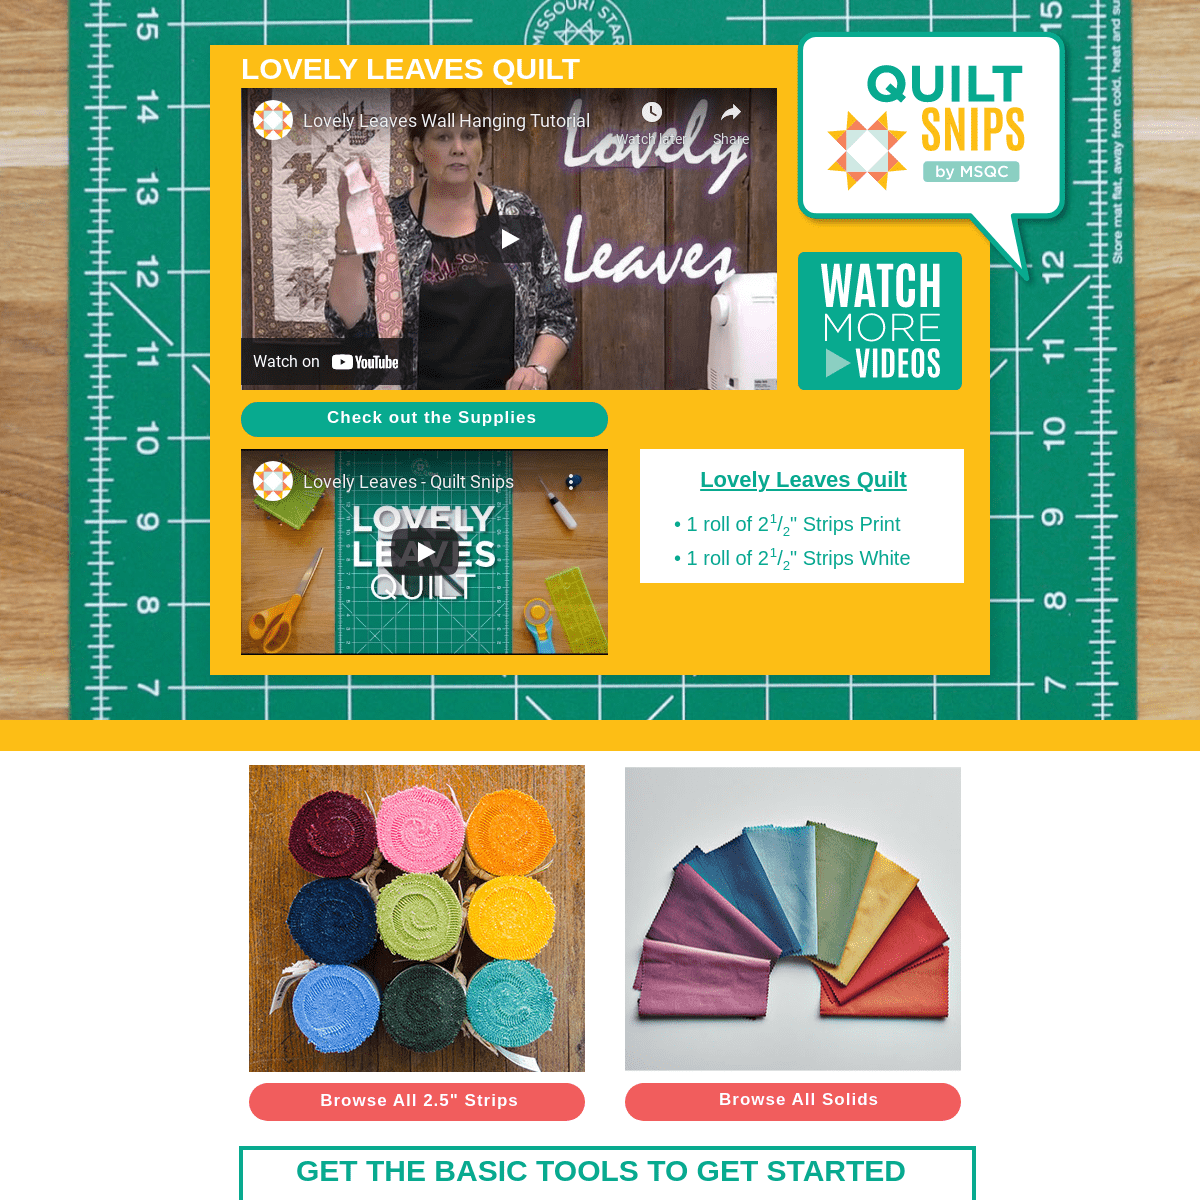 A complete backup of https://www.missouriquiltco.com/land/tutorials/lovely-leaves-quilt-snips/index.html